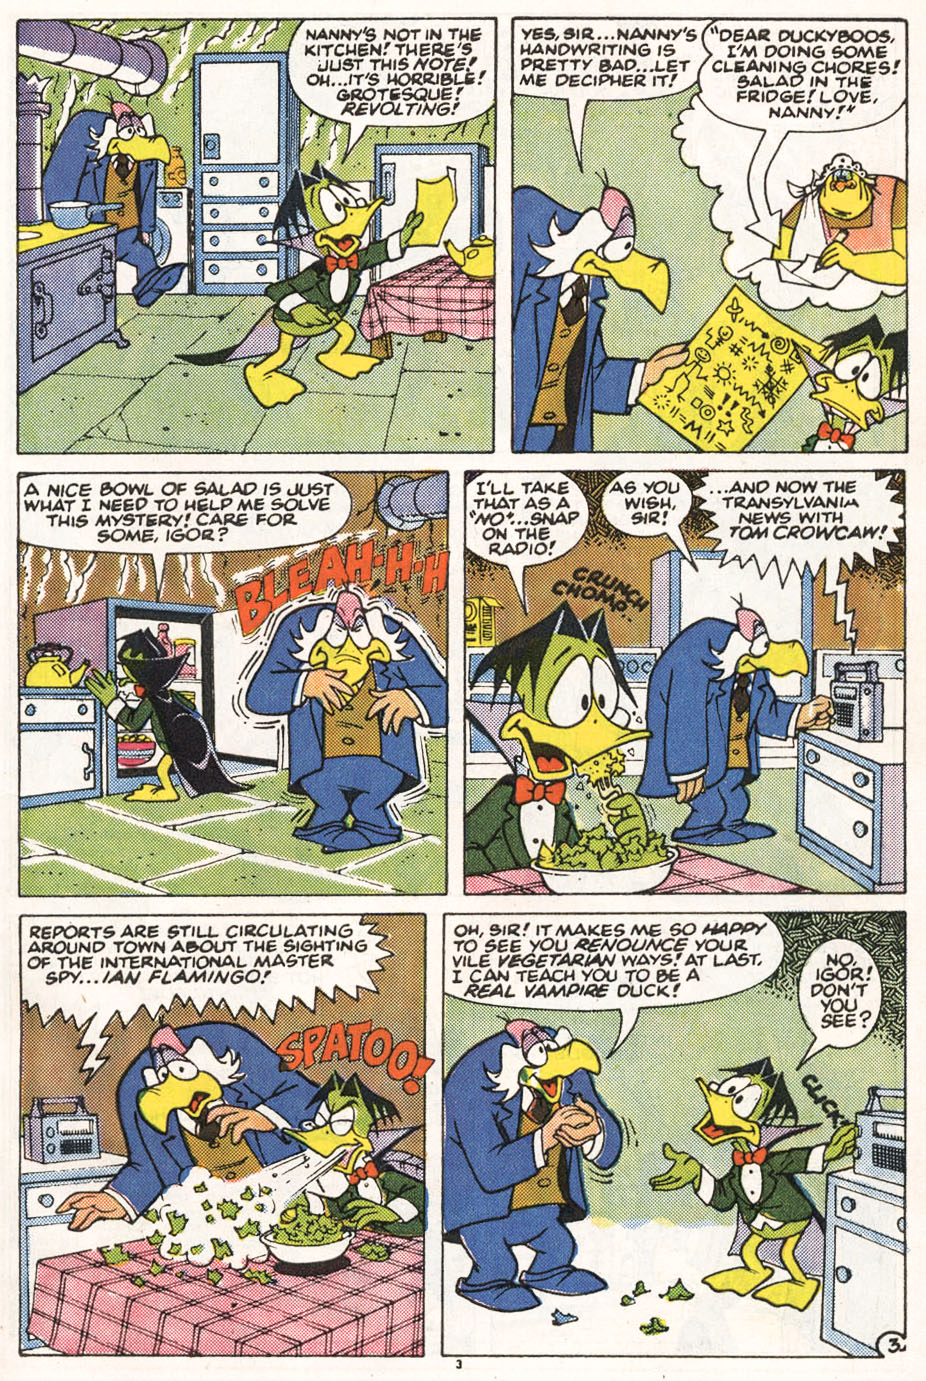 Read online Count Duckula comic -  Issue #2 - 5